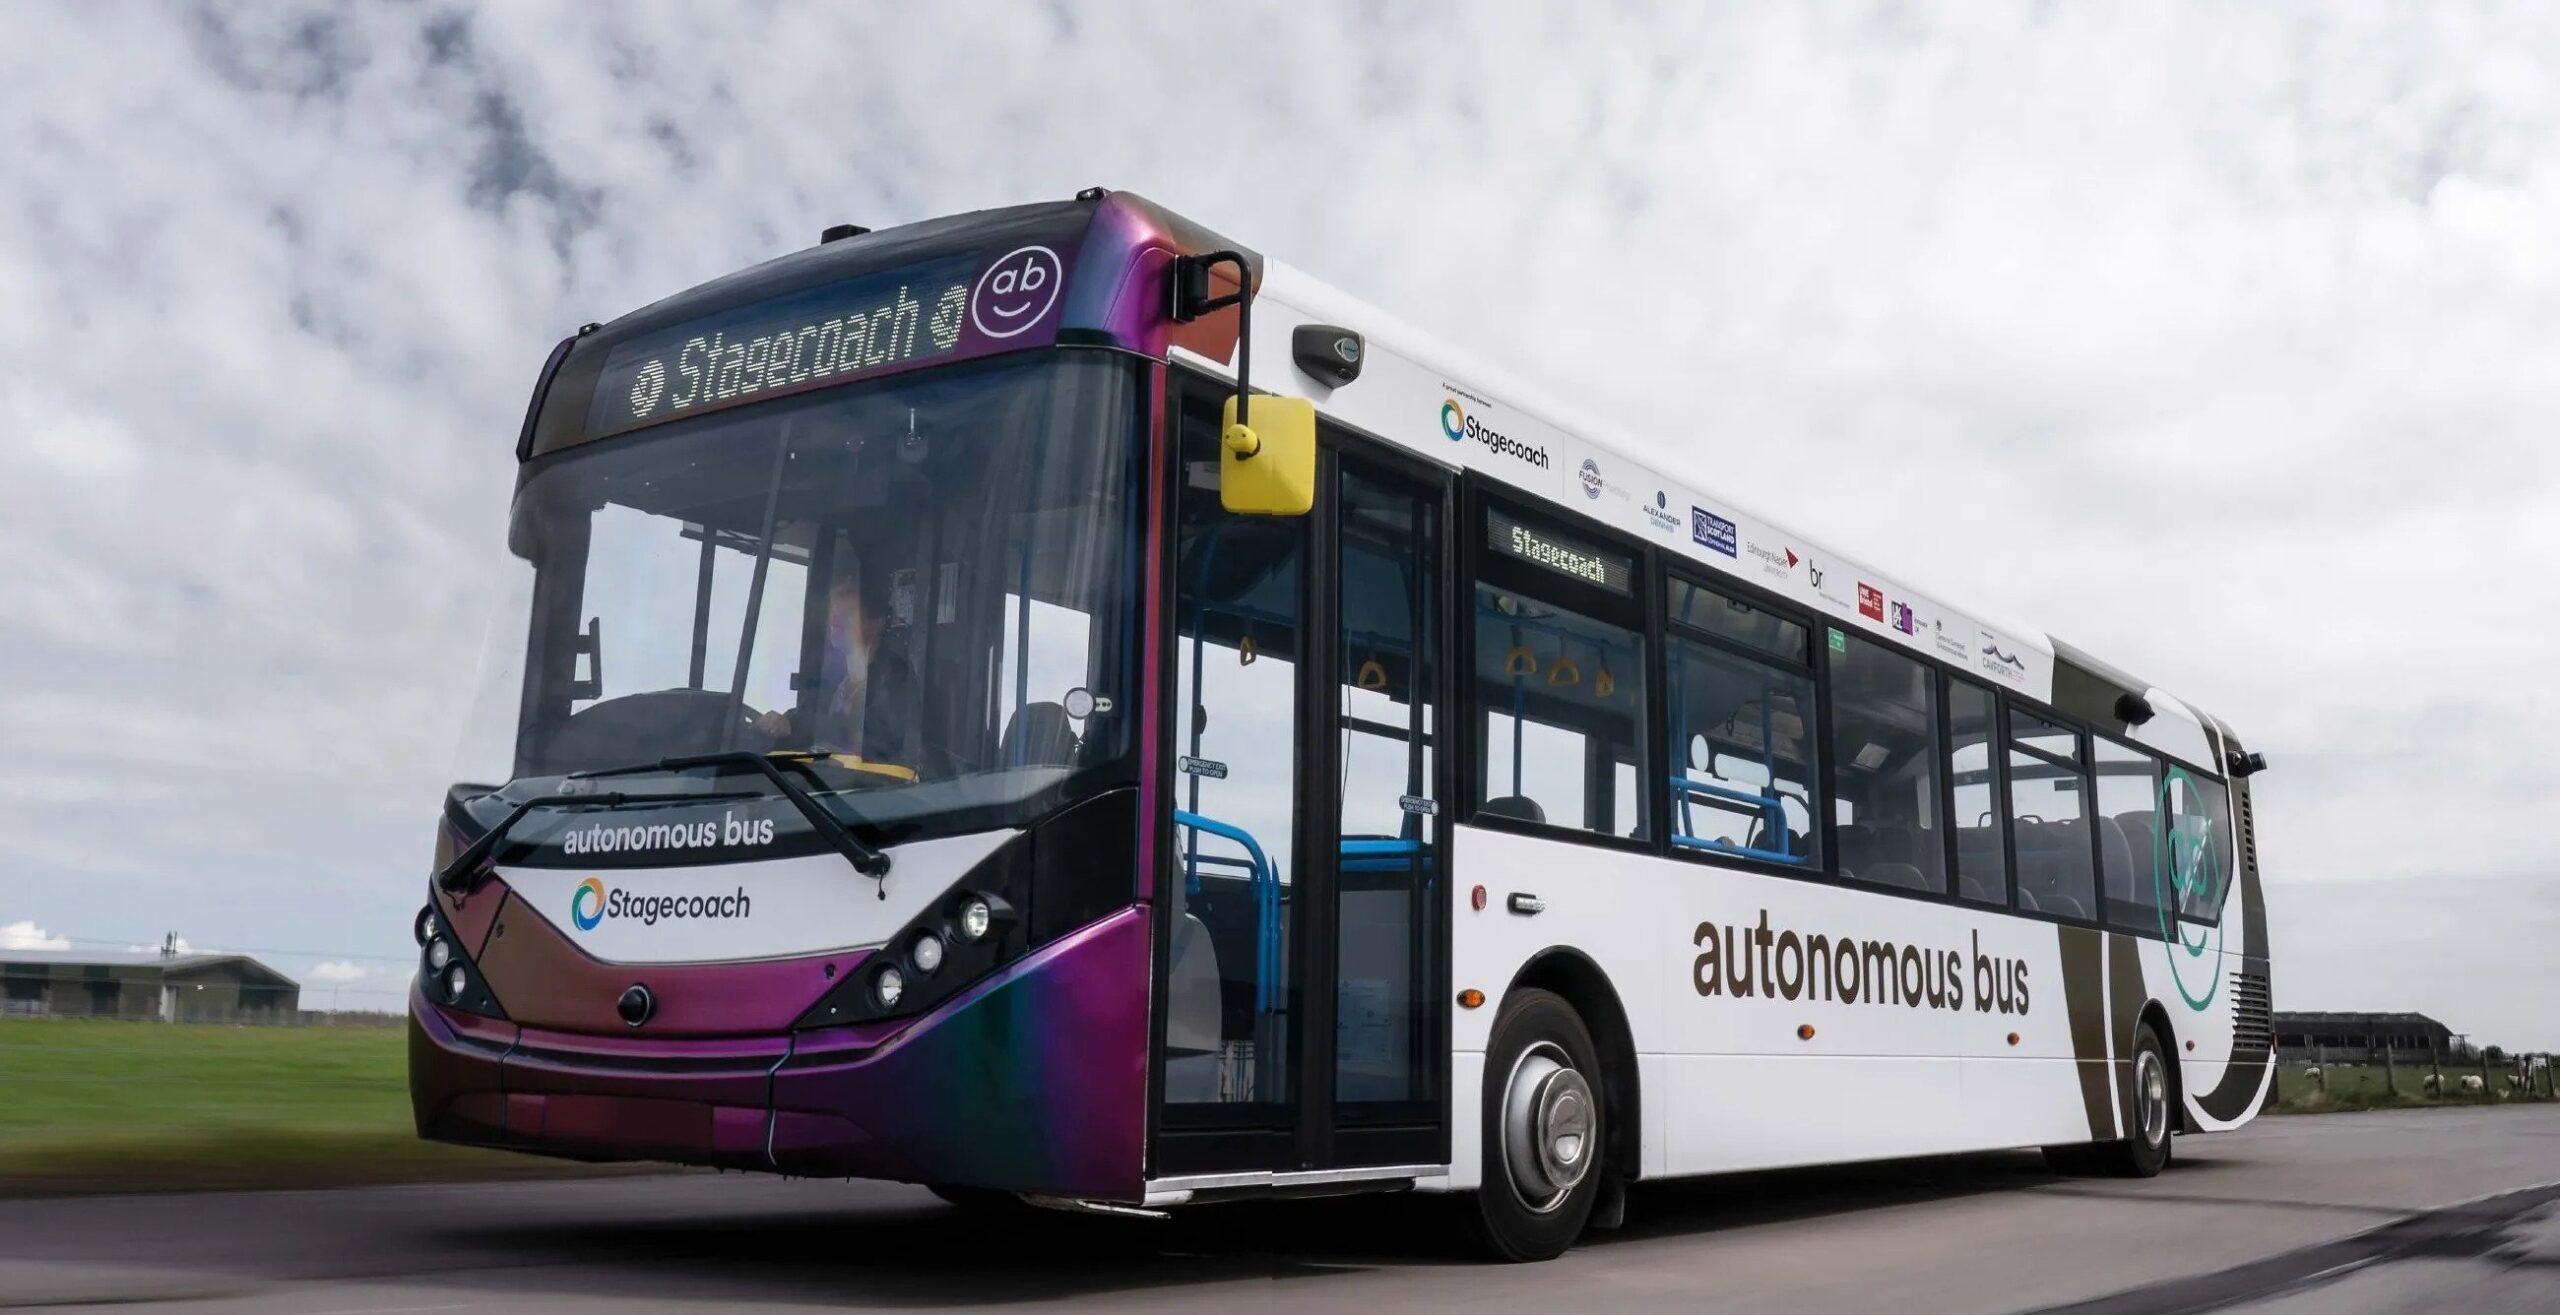 UK’s first fully autonomous bus service has launched in Scotland